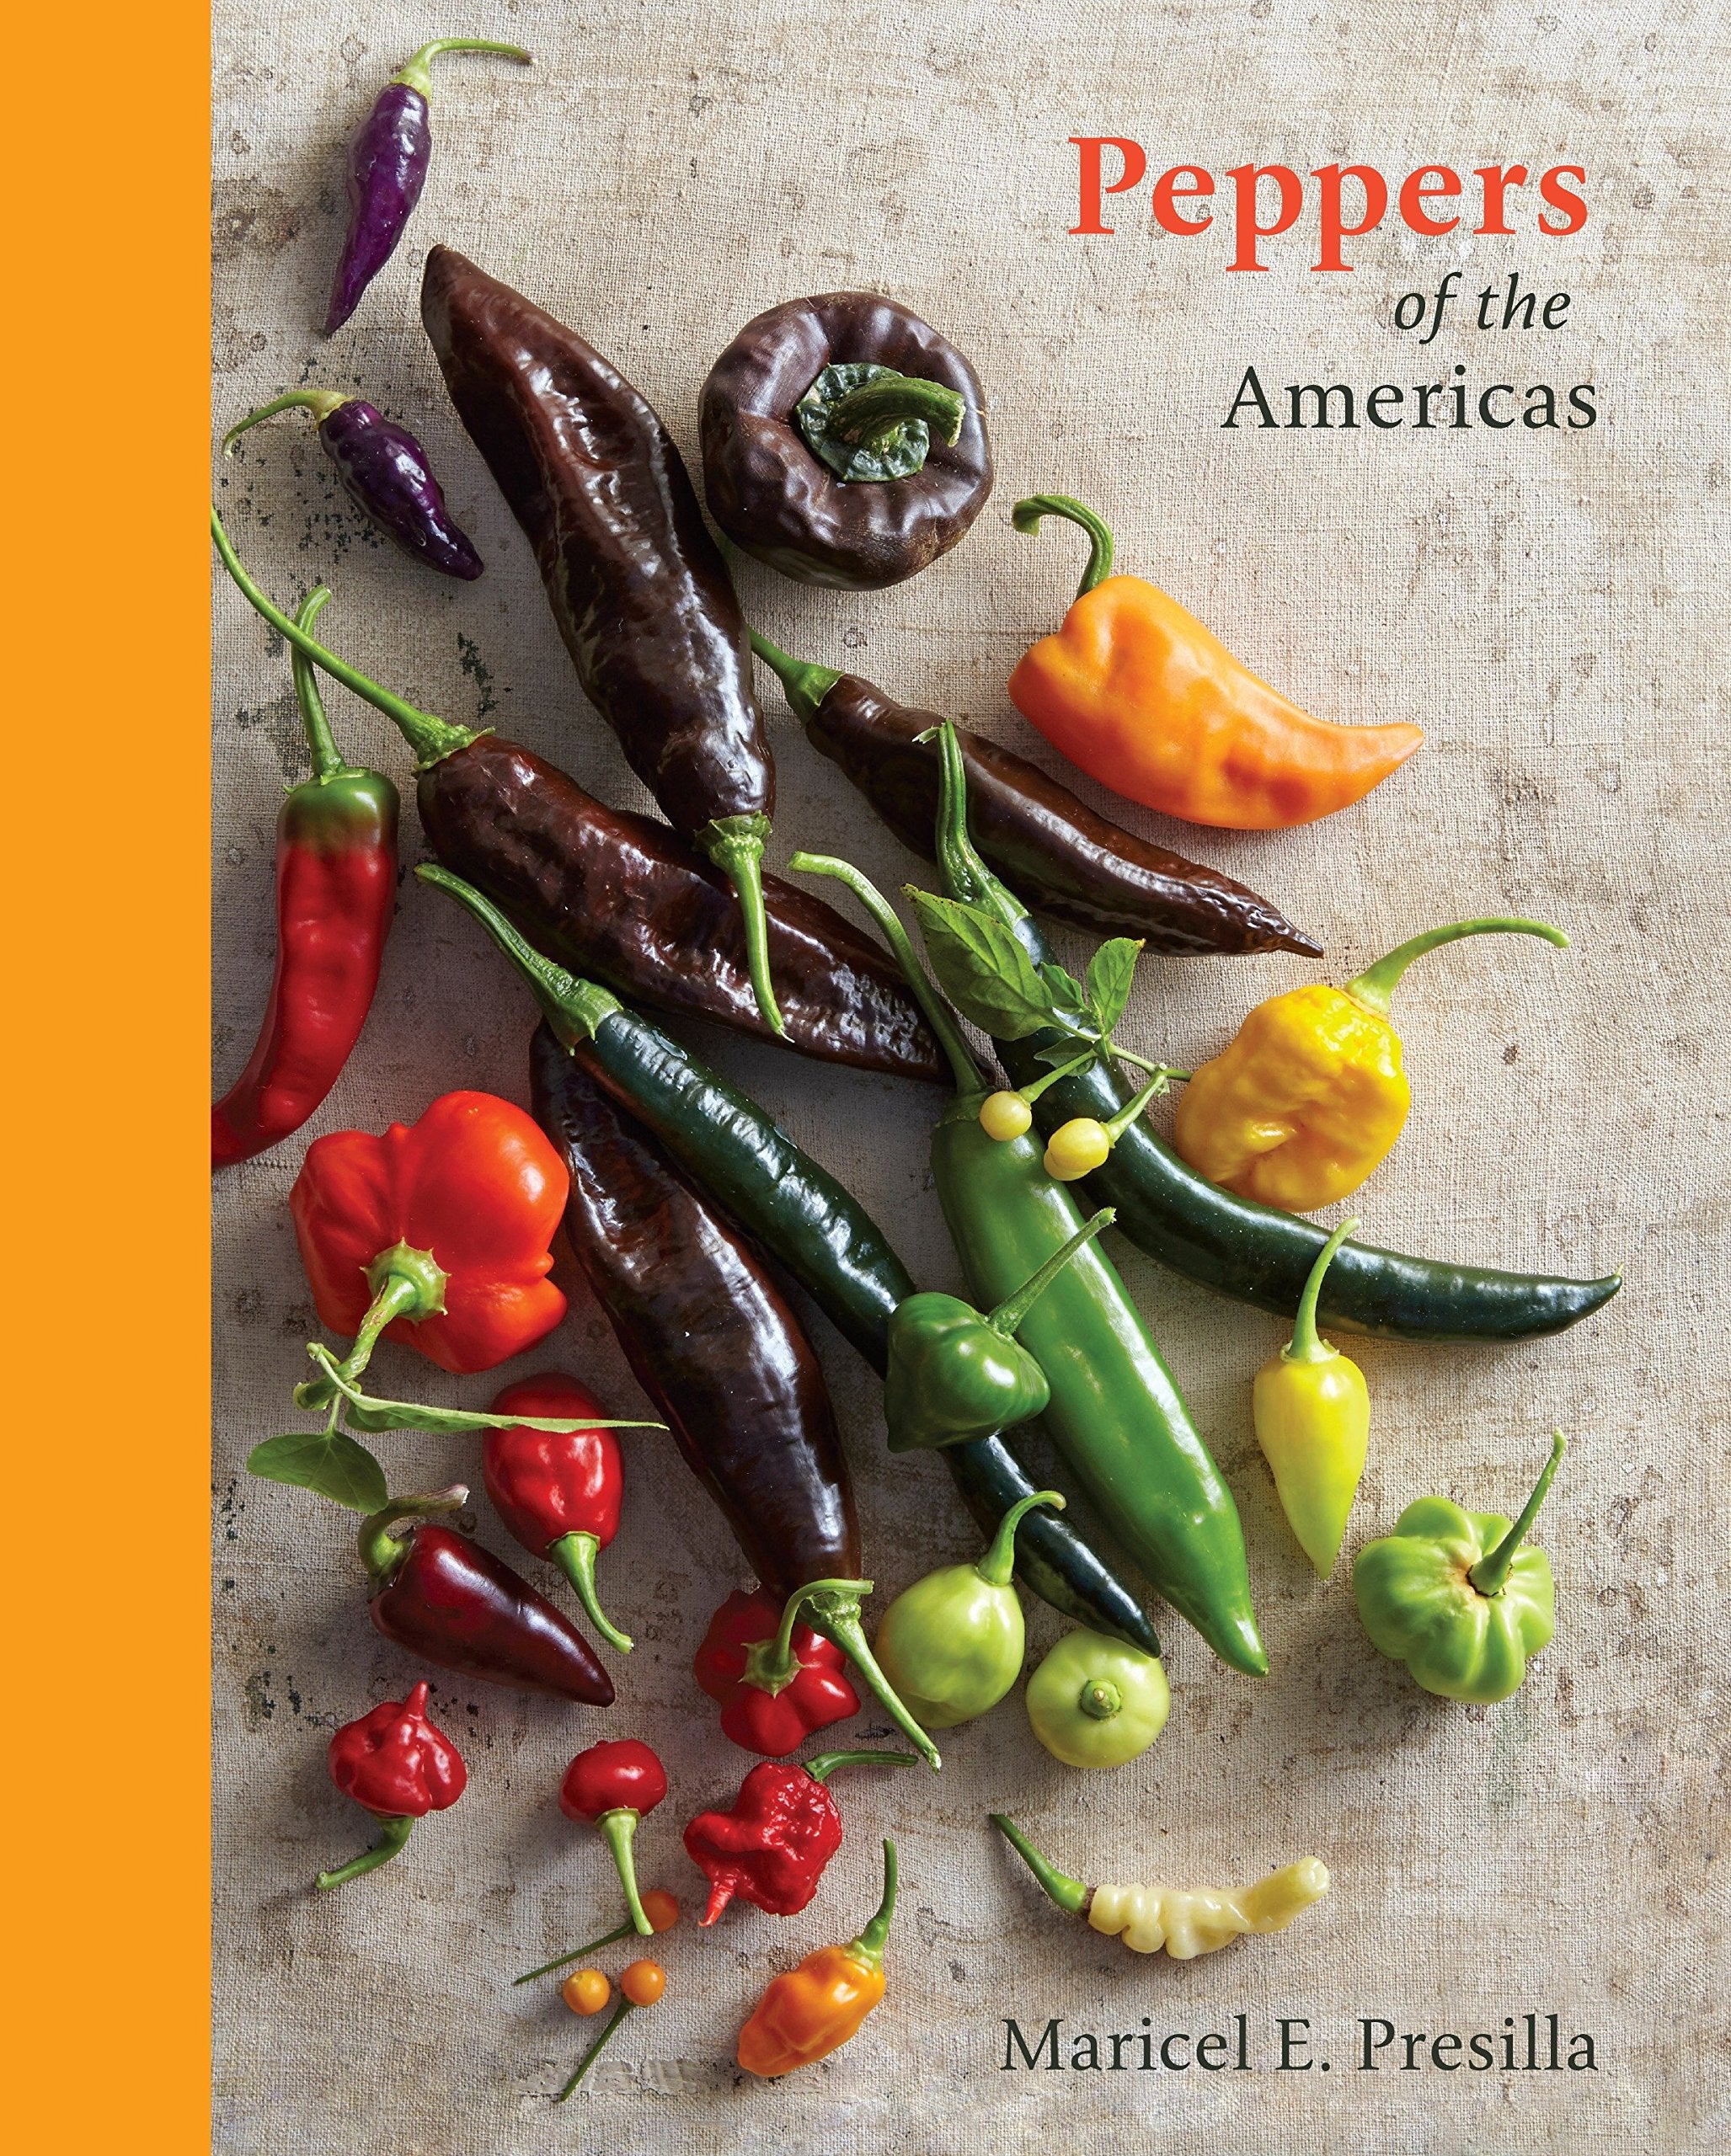 Peppers of the Americas: The Remarkable Capsicums That Forever Changed Flavor (Maricel E. Presilla)